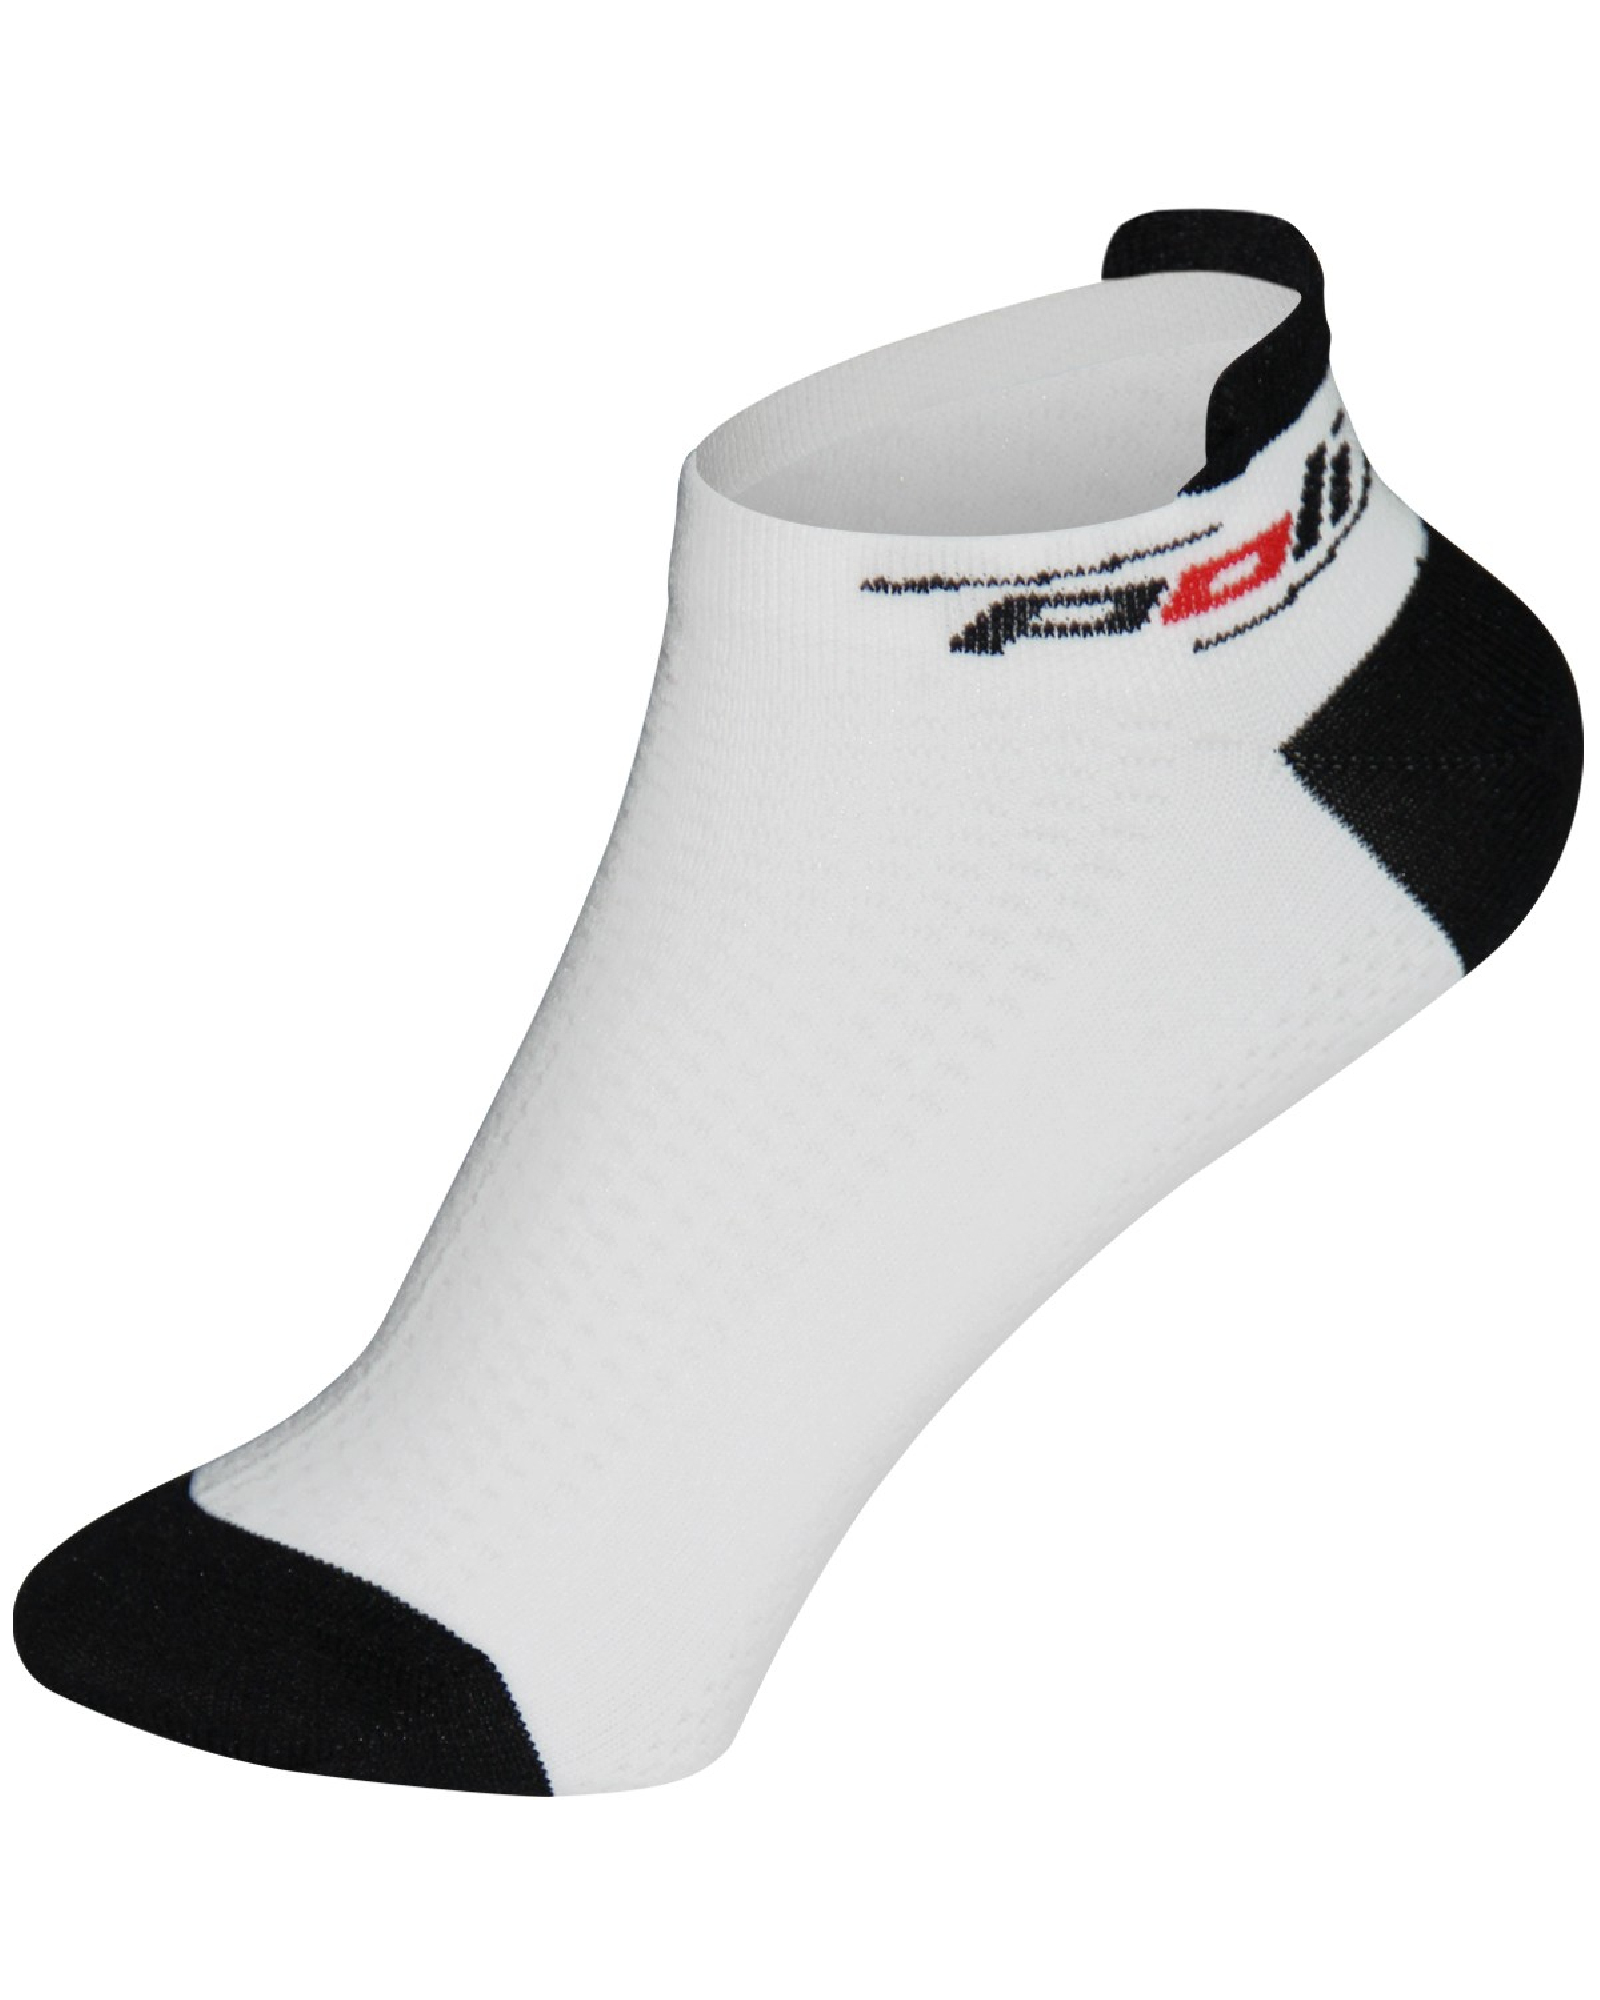 Chaussettes coton homme - Chaussettes invisibles sport R'max - Olympia